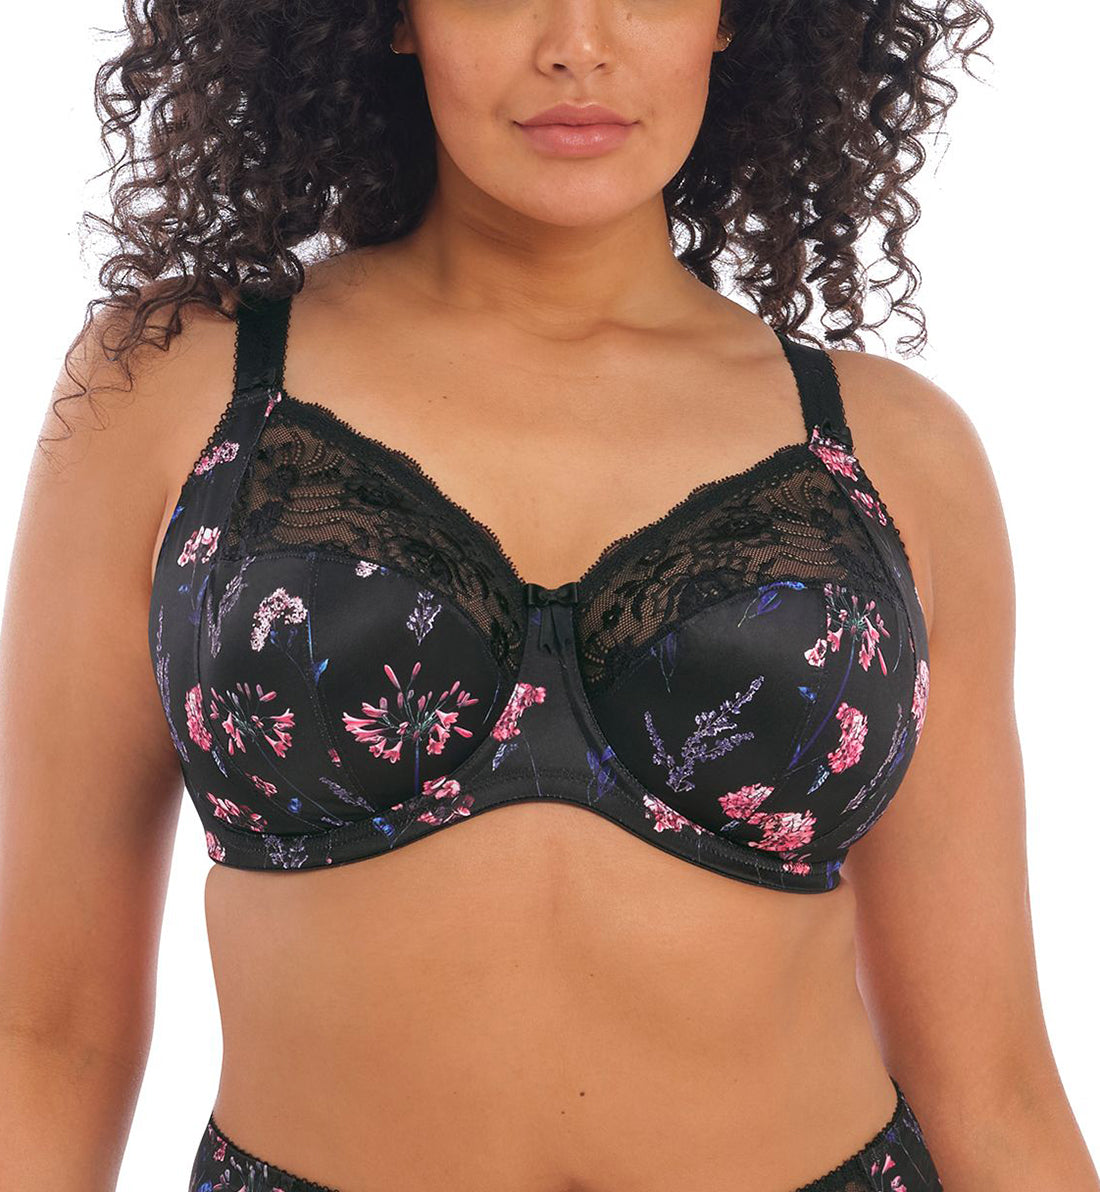 Elomi Morgan Stretch Lace Banded Underwire Bra (4110),32GG,Moonlight Meadow - Moonlight Meadow,32GG